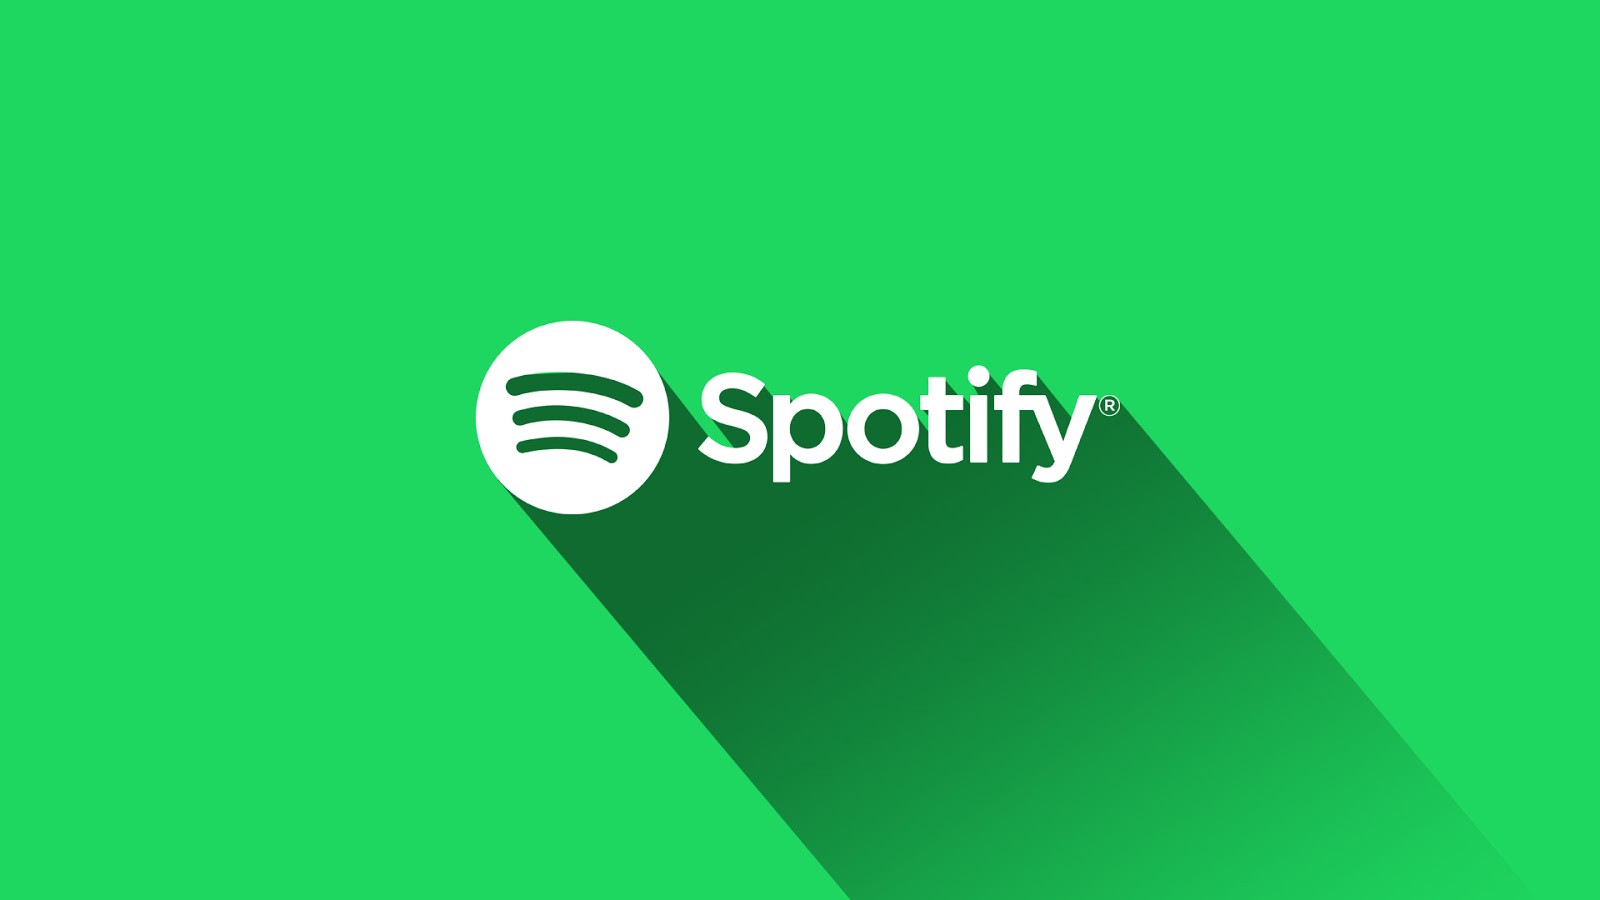 How to promote your music on Spotify?